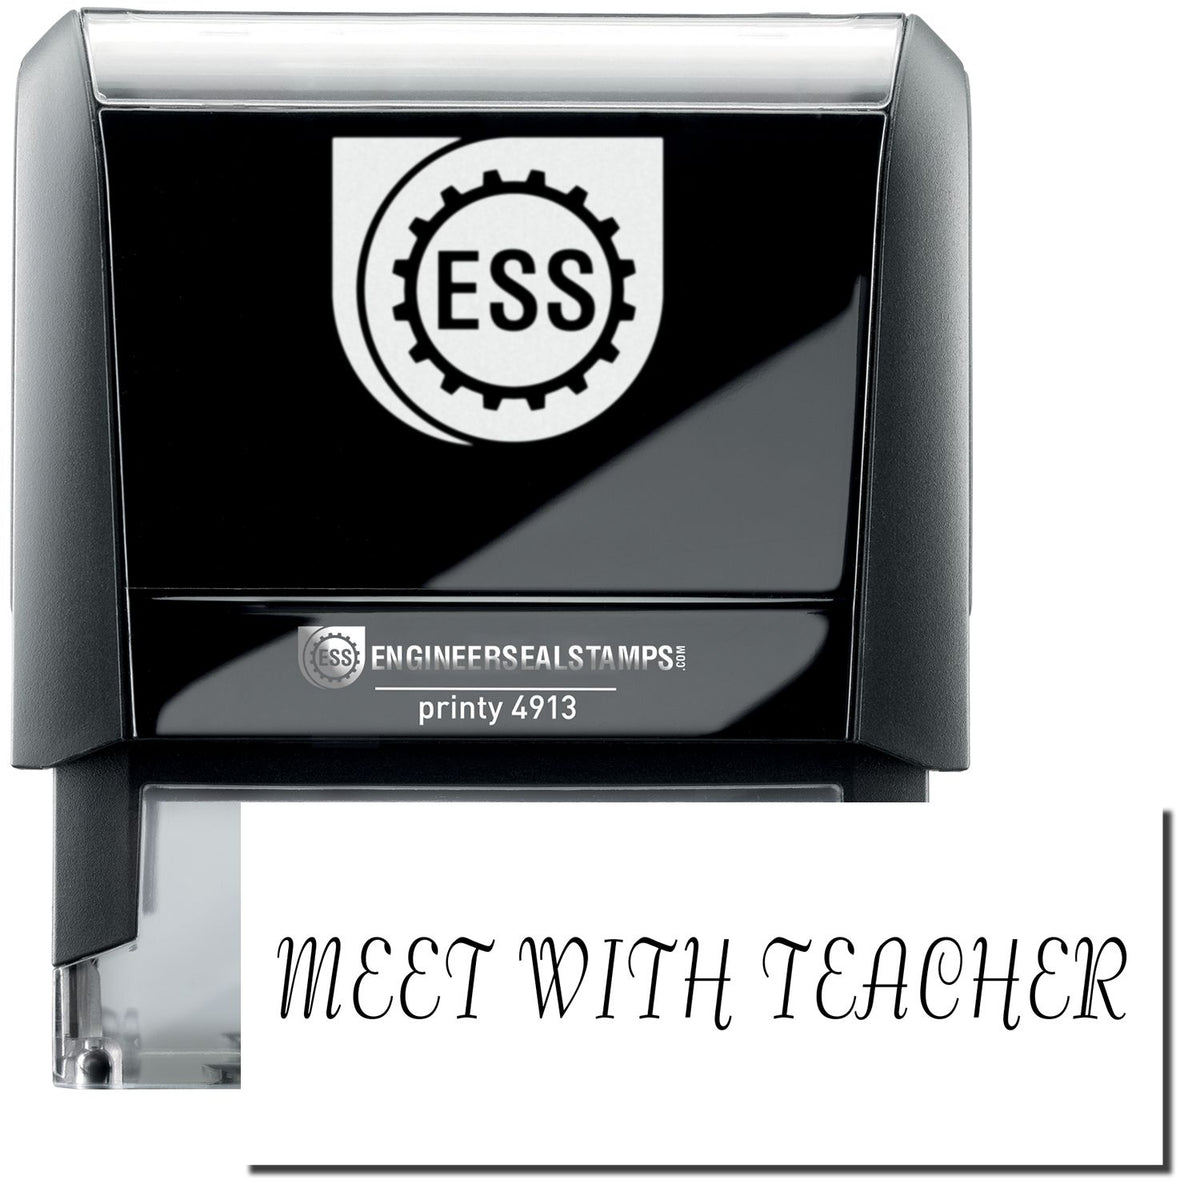 A self-inking stamp with a stamped image showing how the text &quot;MEET WITH TEACHER&quot; in a unique large font is displayed after stamping.